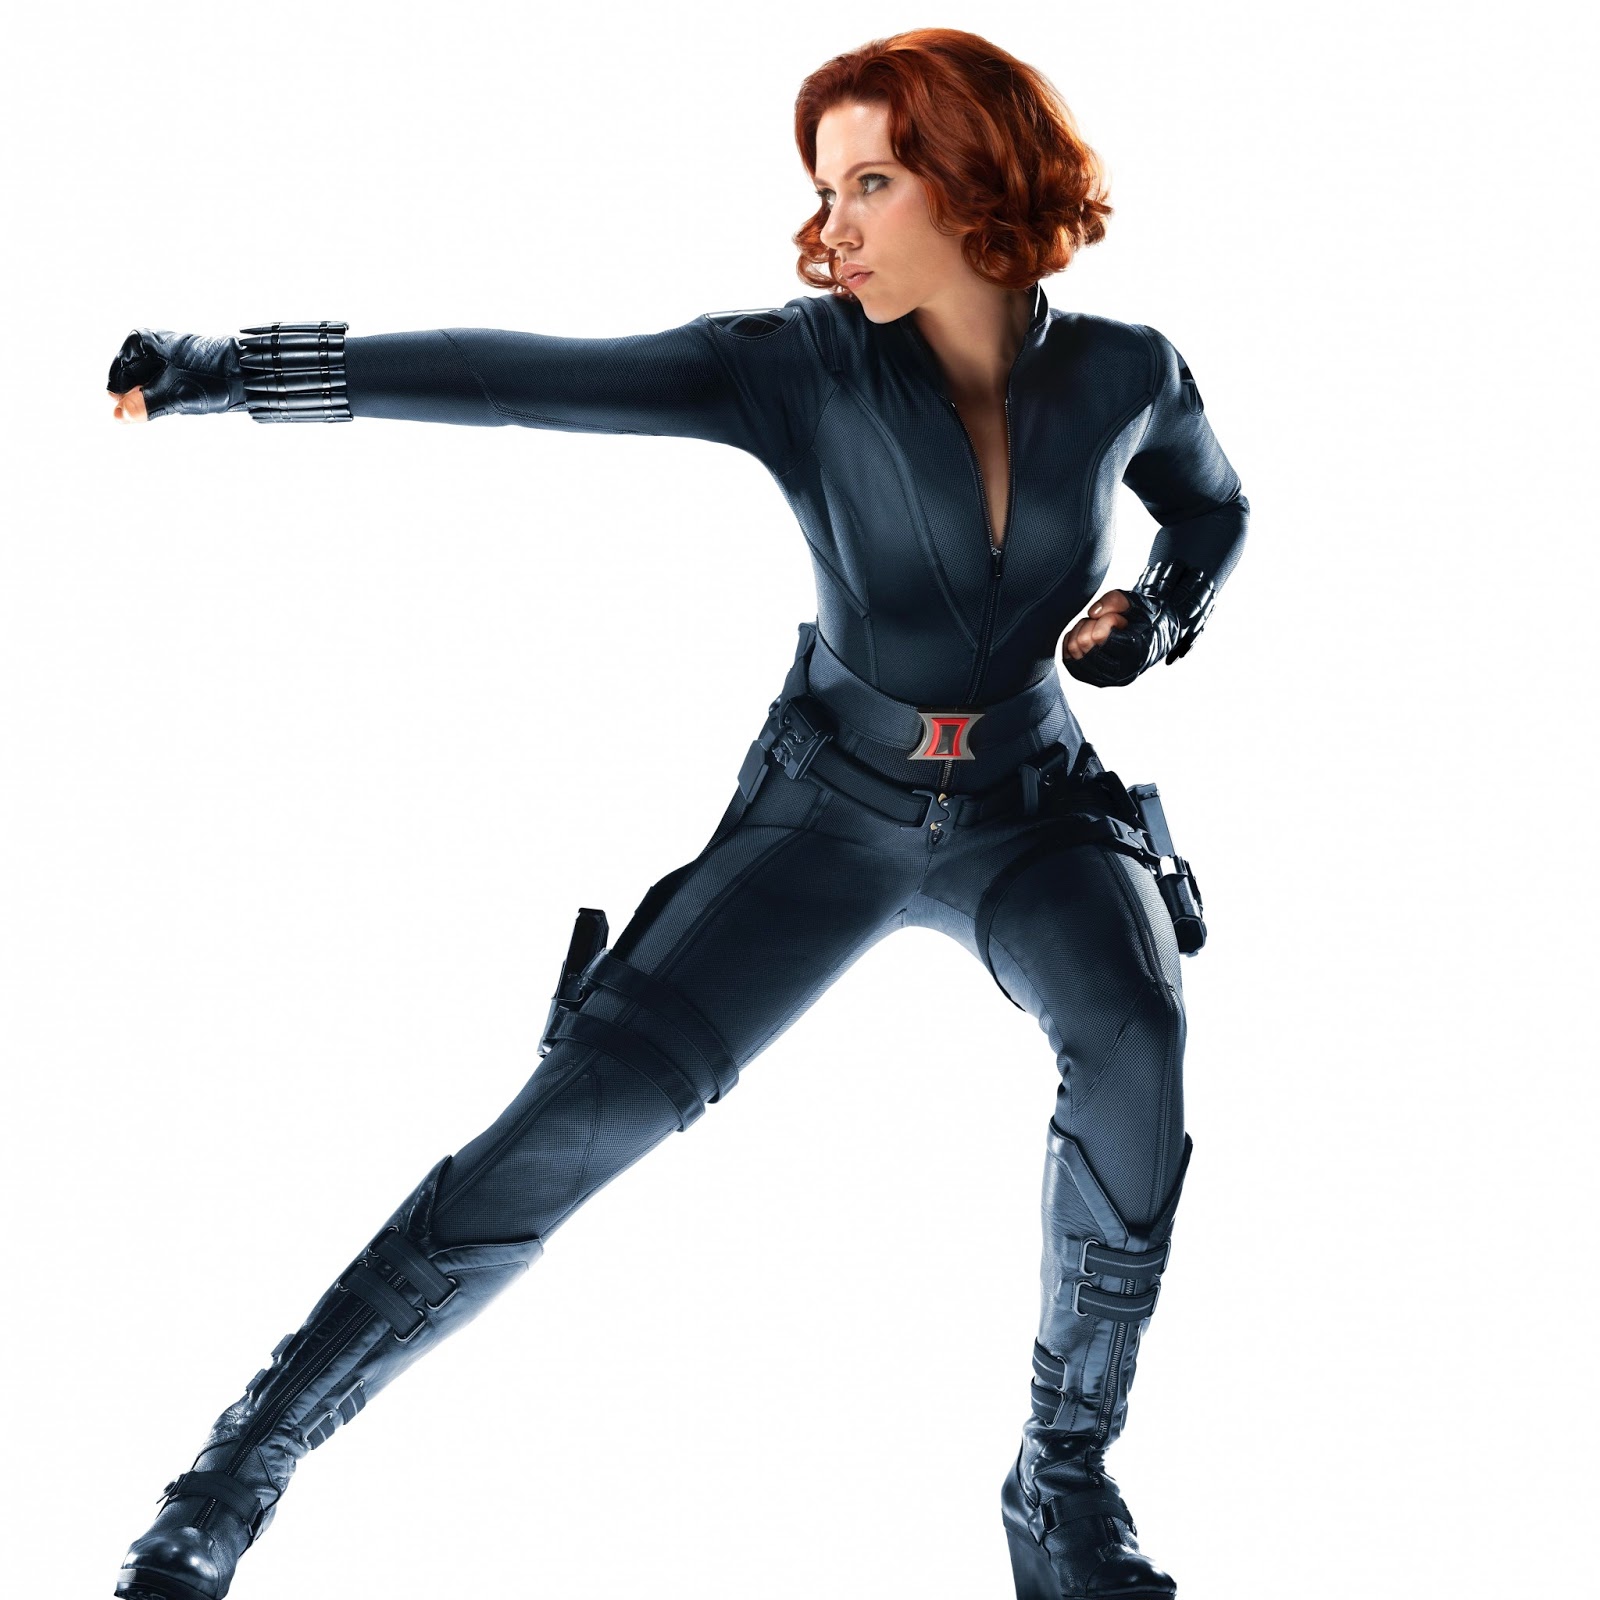 Not sure if this is the actual Scarlett could be the action figure ...